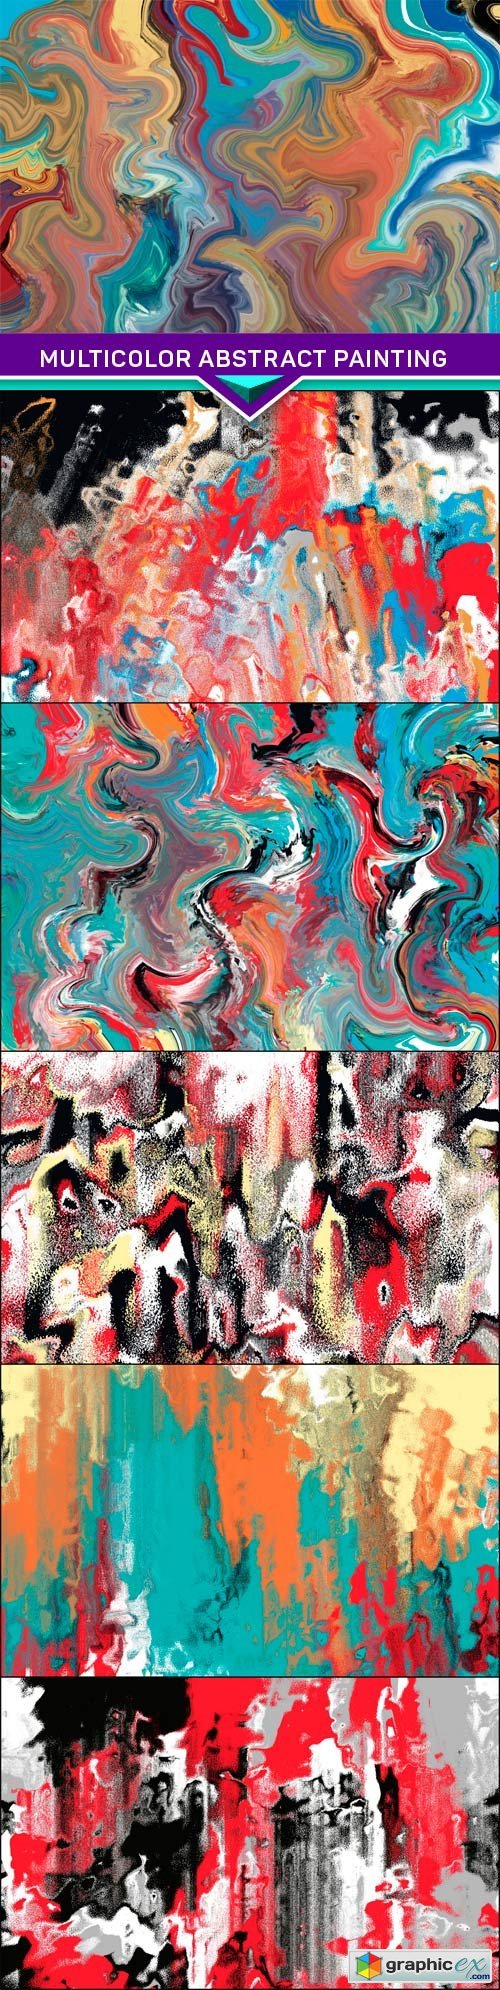 Multicolor abstract painting 6x JPEG